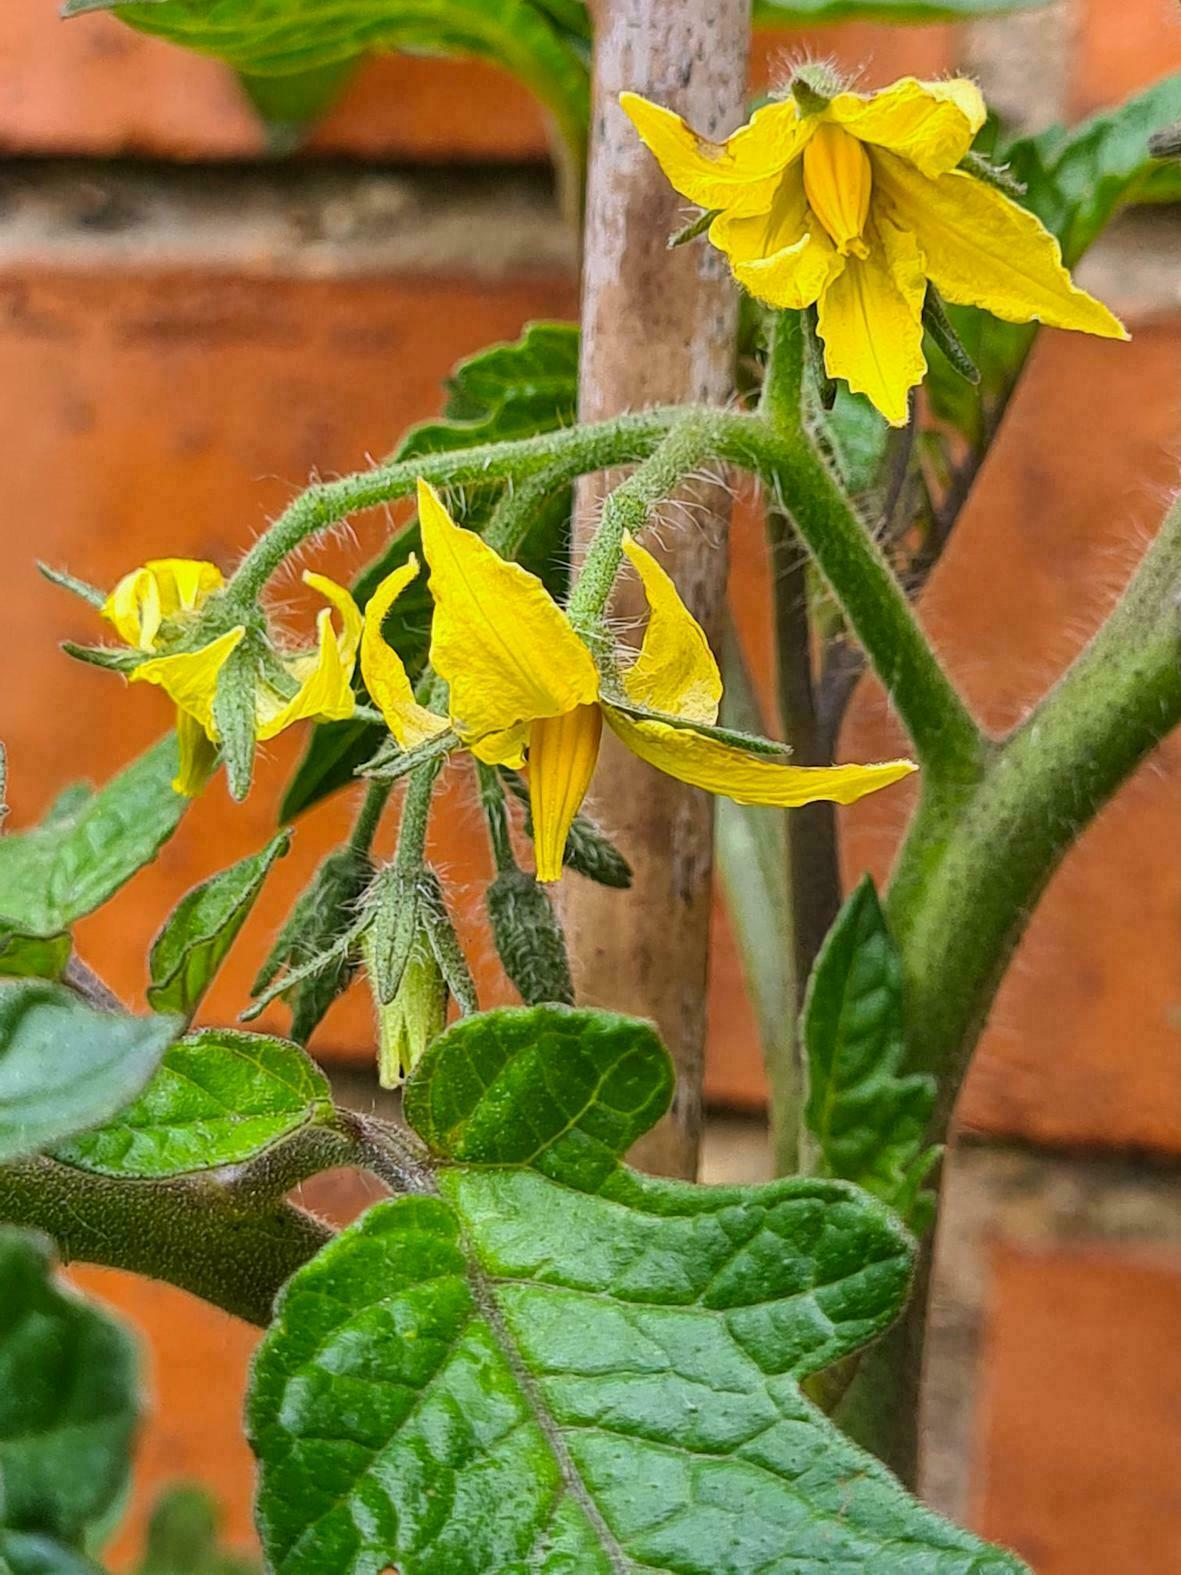 Flowers on SylvaGrown tomatoes